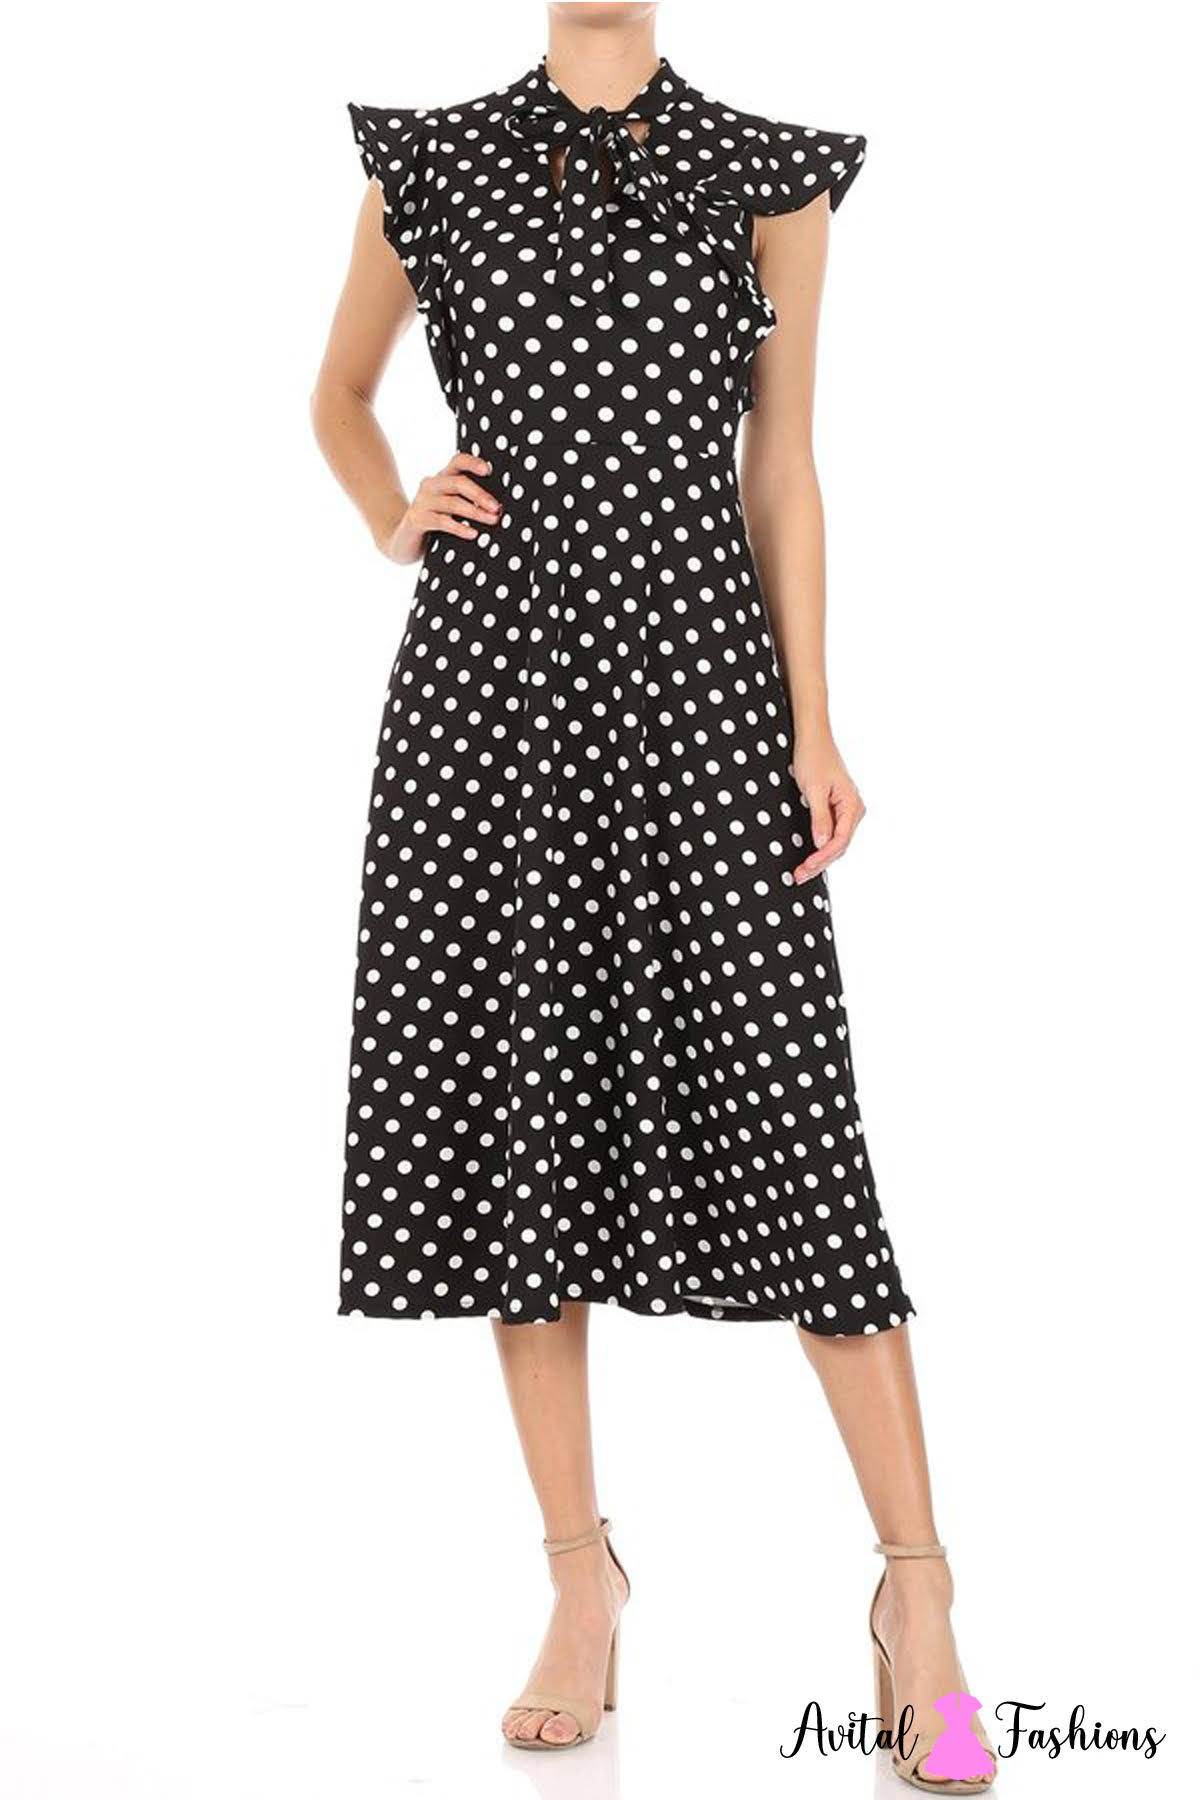 Chico Dress Black And White Polka Dot - From the Gecko Boutique